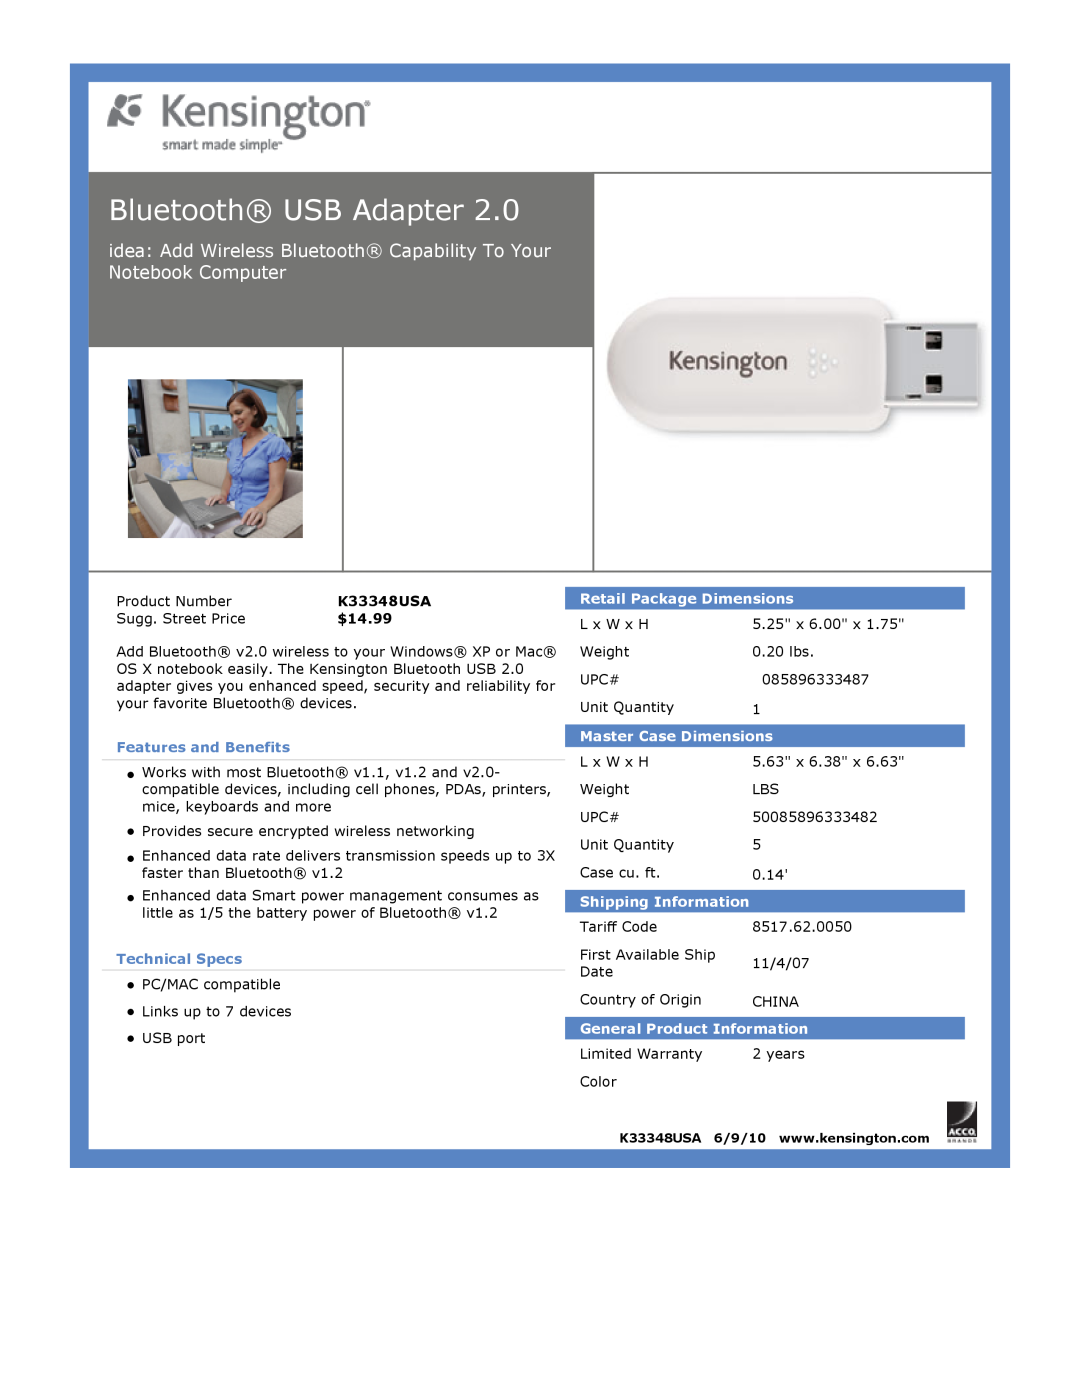 Kensington EU64325 Bluetooth USB Adapter, $14.99, Features and Benefits, Technical Specs, Retail Package Dimensions 